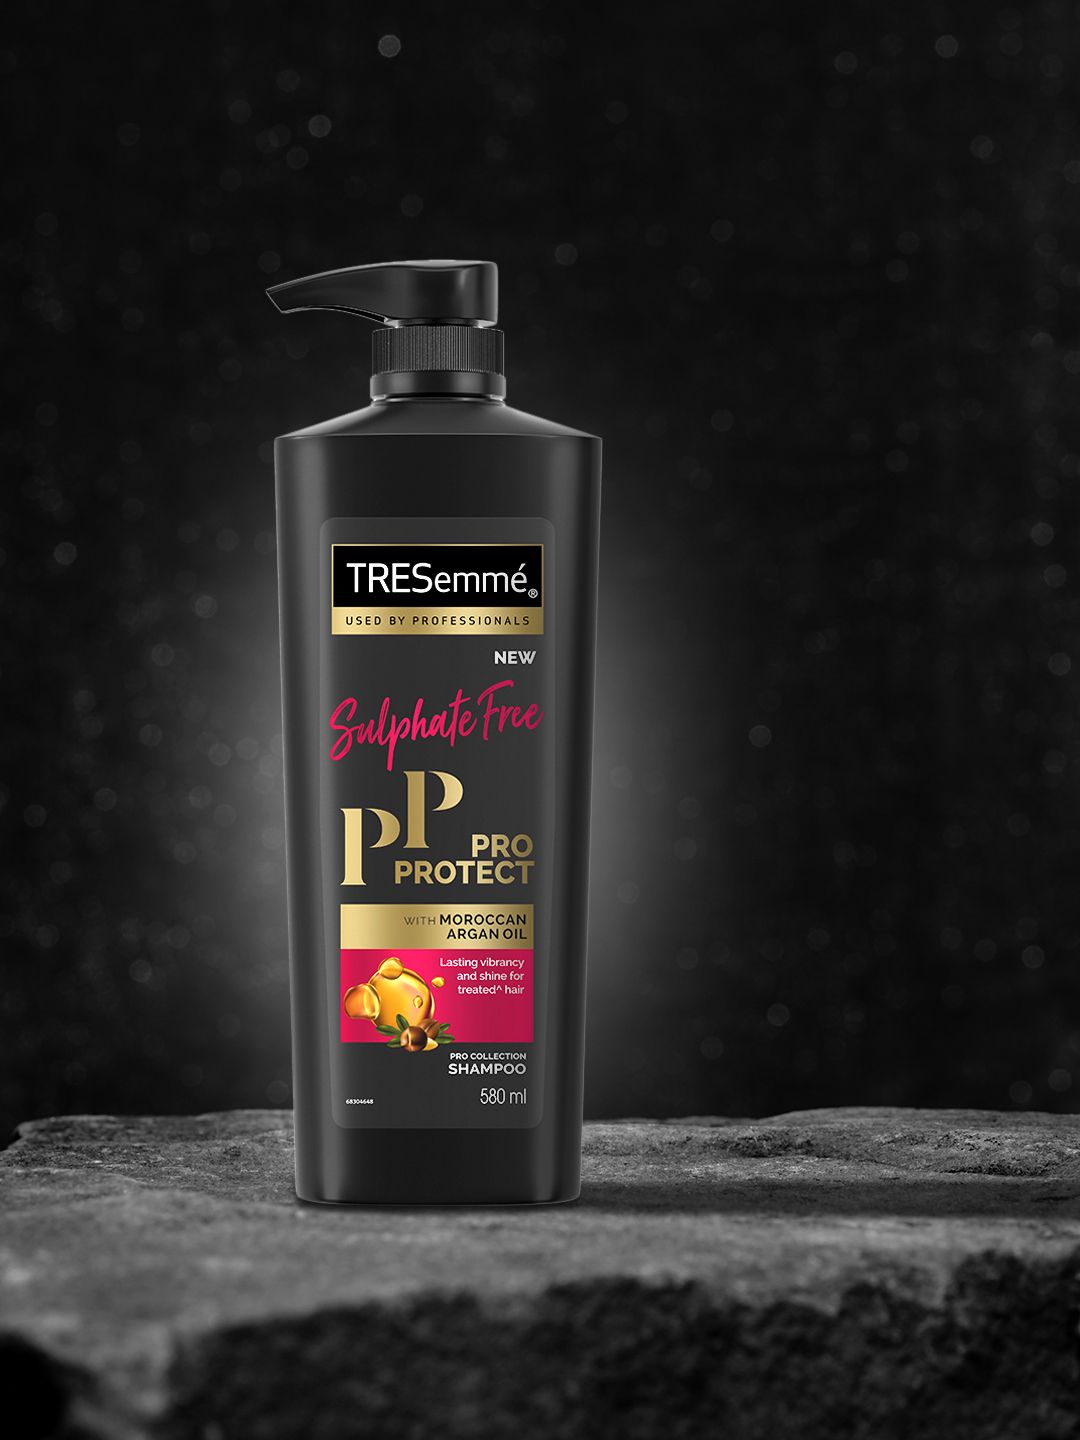 TRESemme Pro Protect Sulphate Free Shampoo 580 ml Price in India